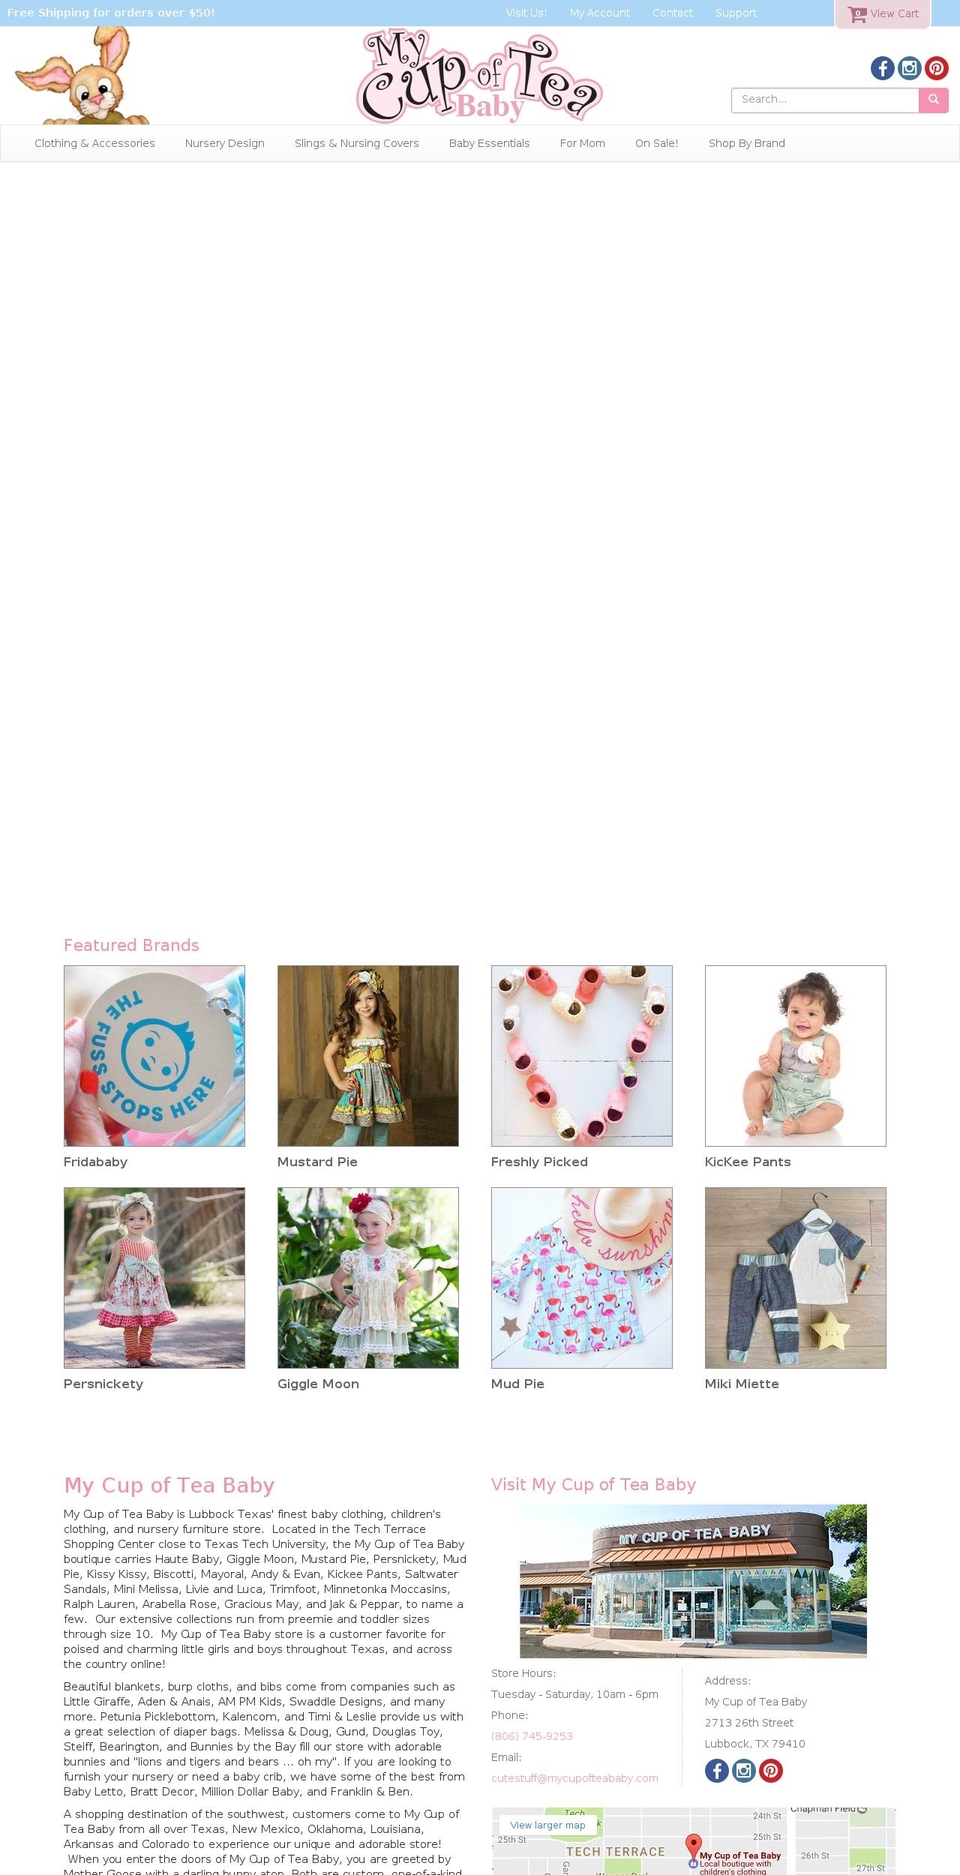 Sense Shopify theme site example mycupofteababy.com